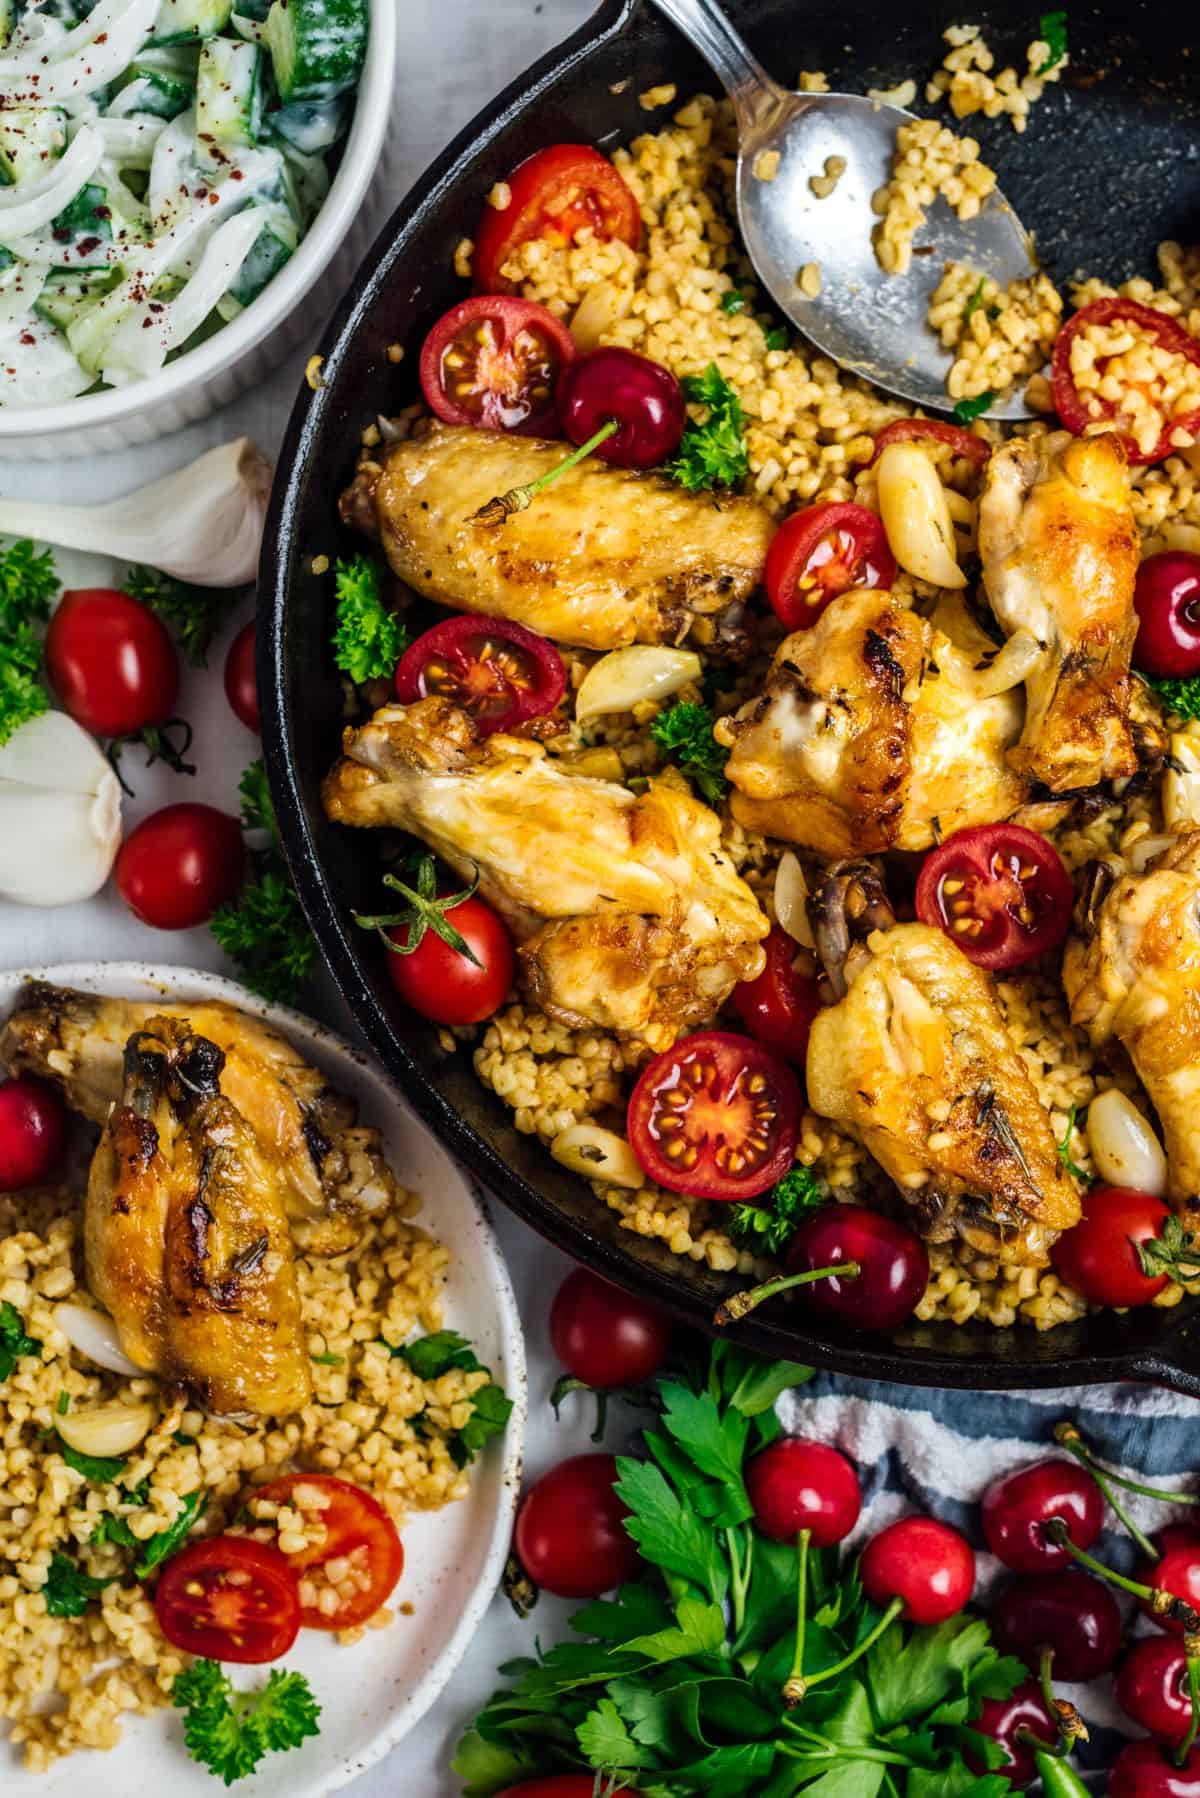 Chicken wings and bulgur wheat in a cast iron pan garnished with cherry tomatoes and parsley and a plate with this meal and another bowl with a cucumber salad on the side.